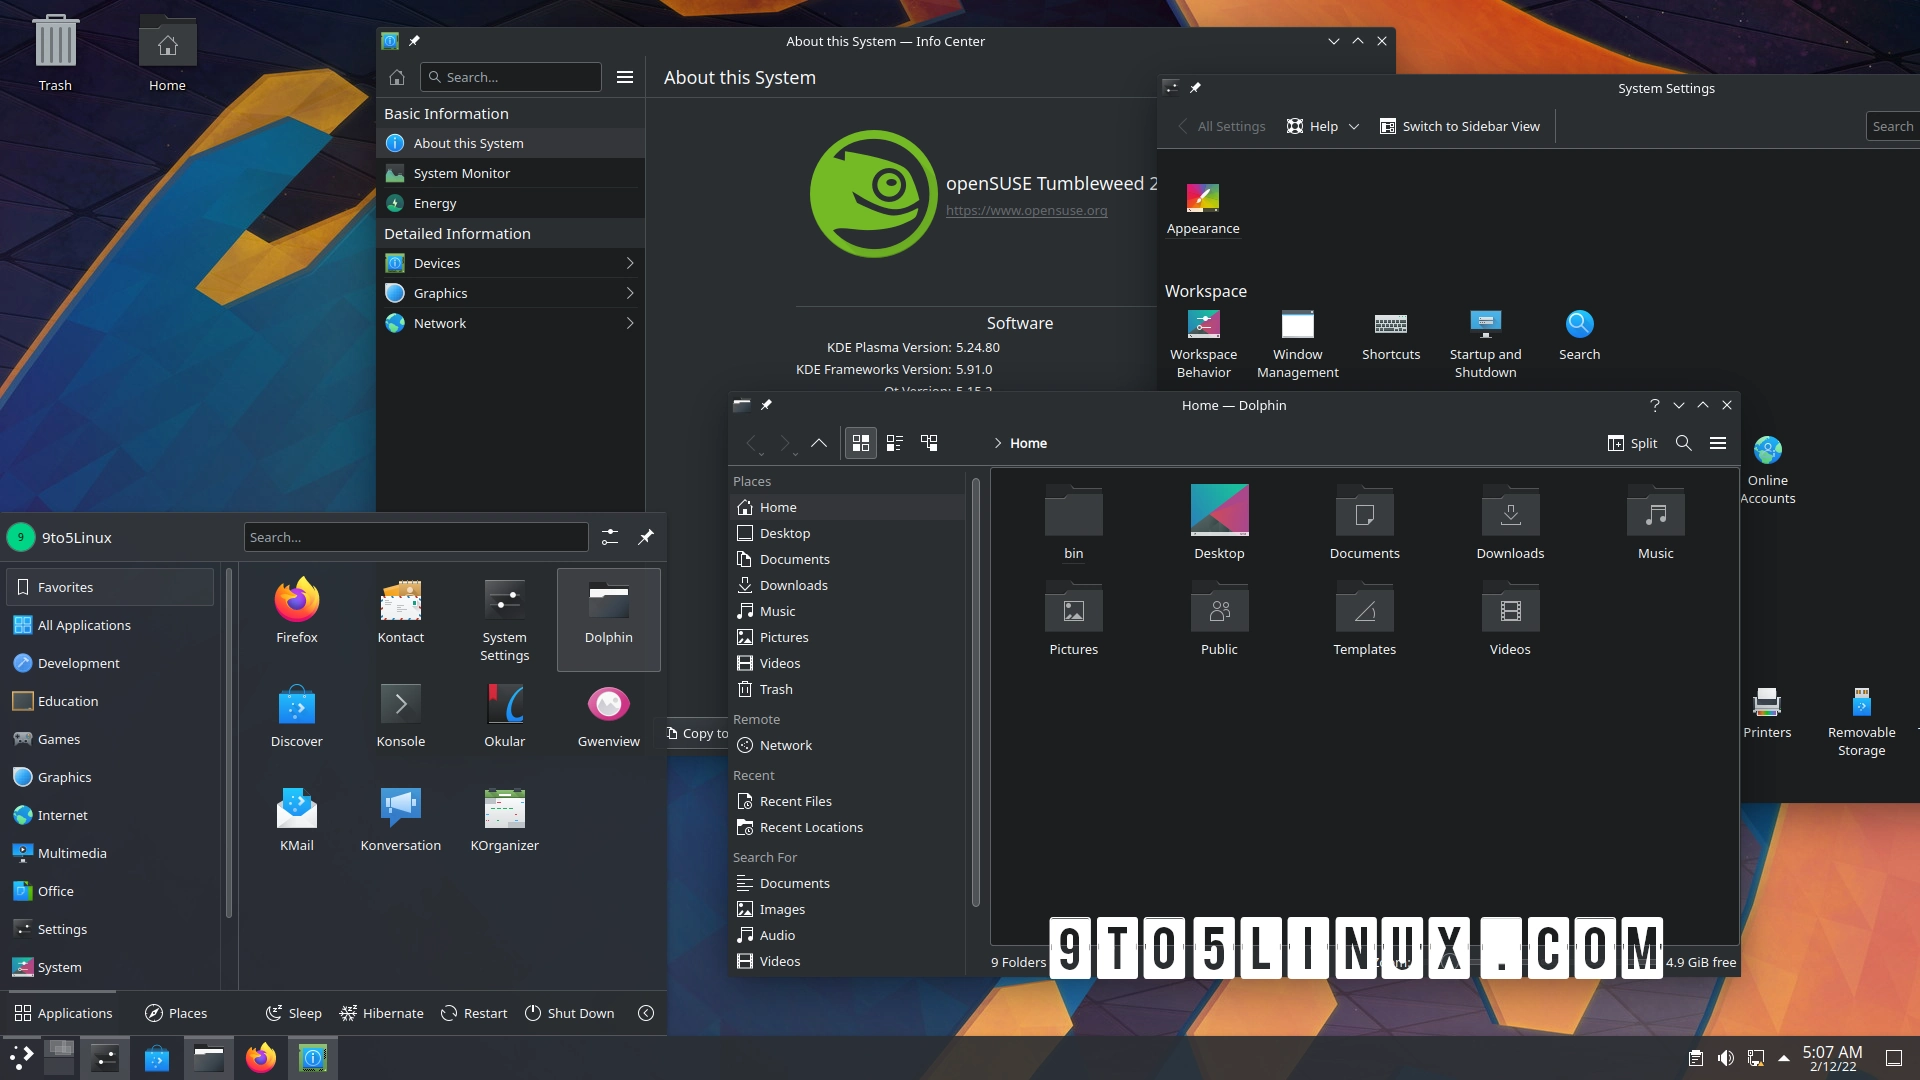 KDE Frameworks 5.91 Adds Root File Operations in Dolphin, Brings Many Improvements